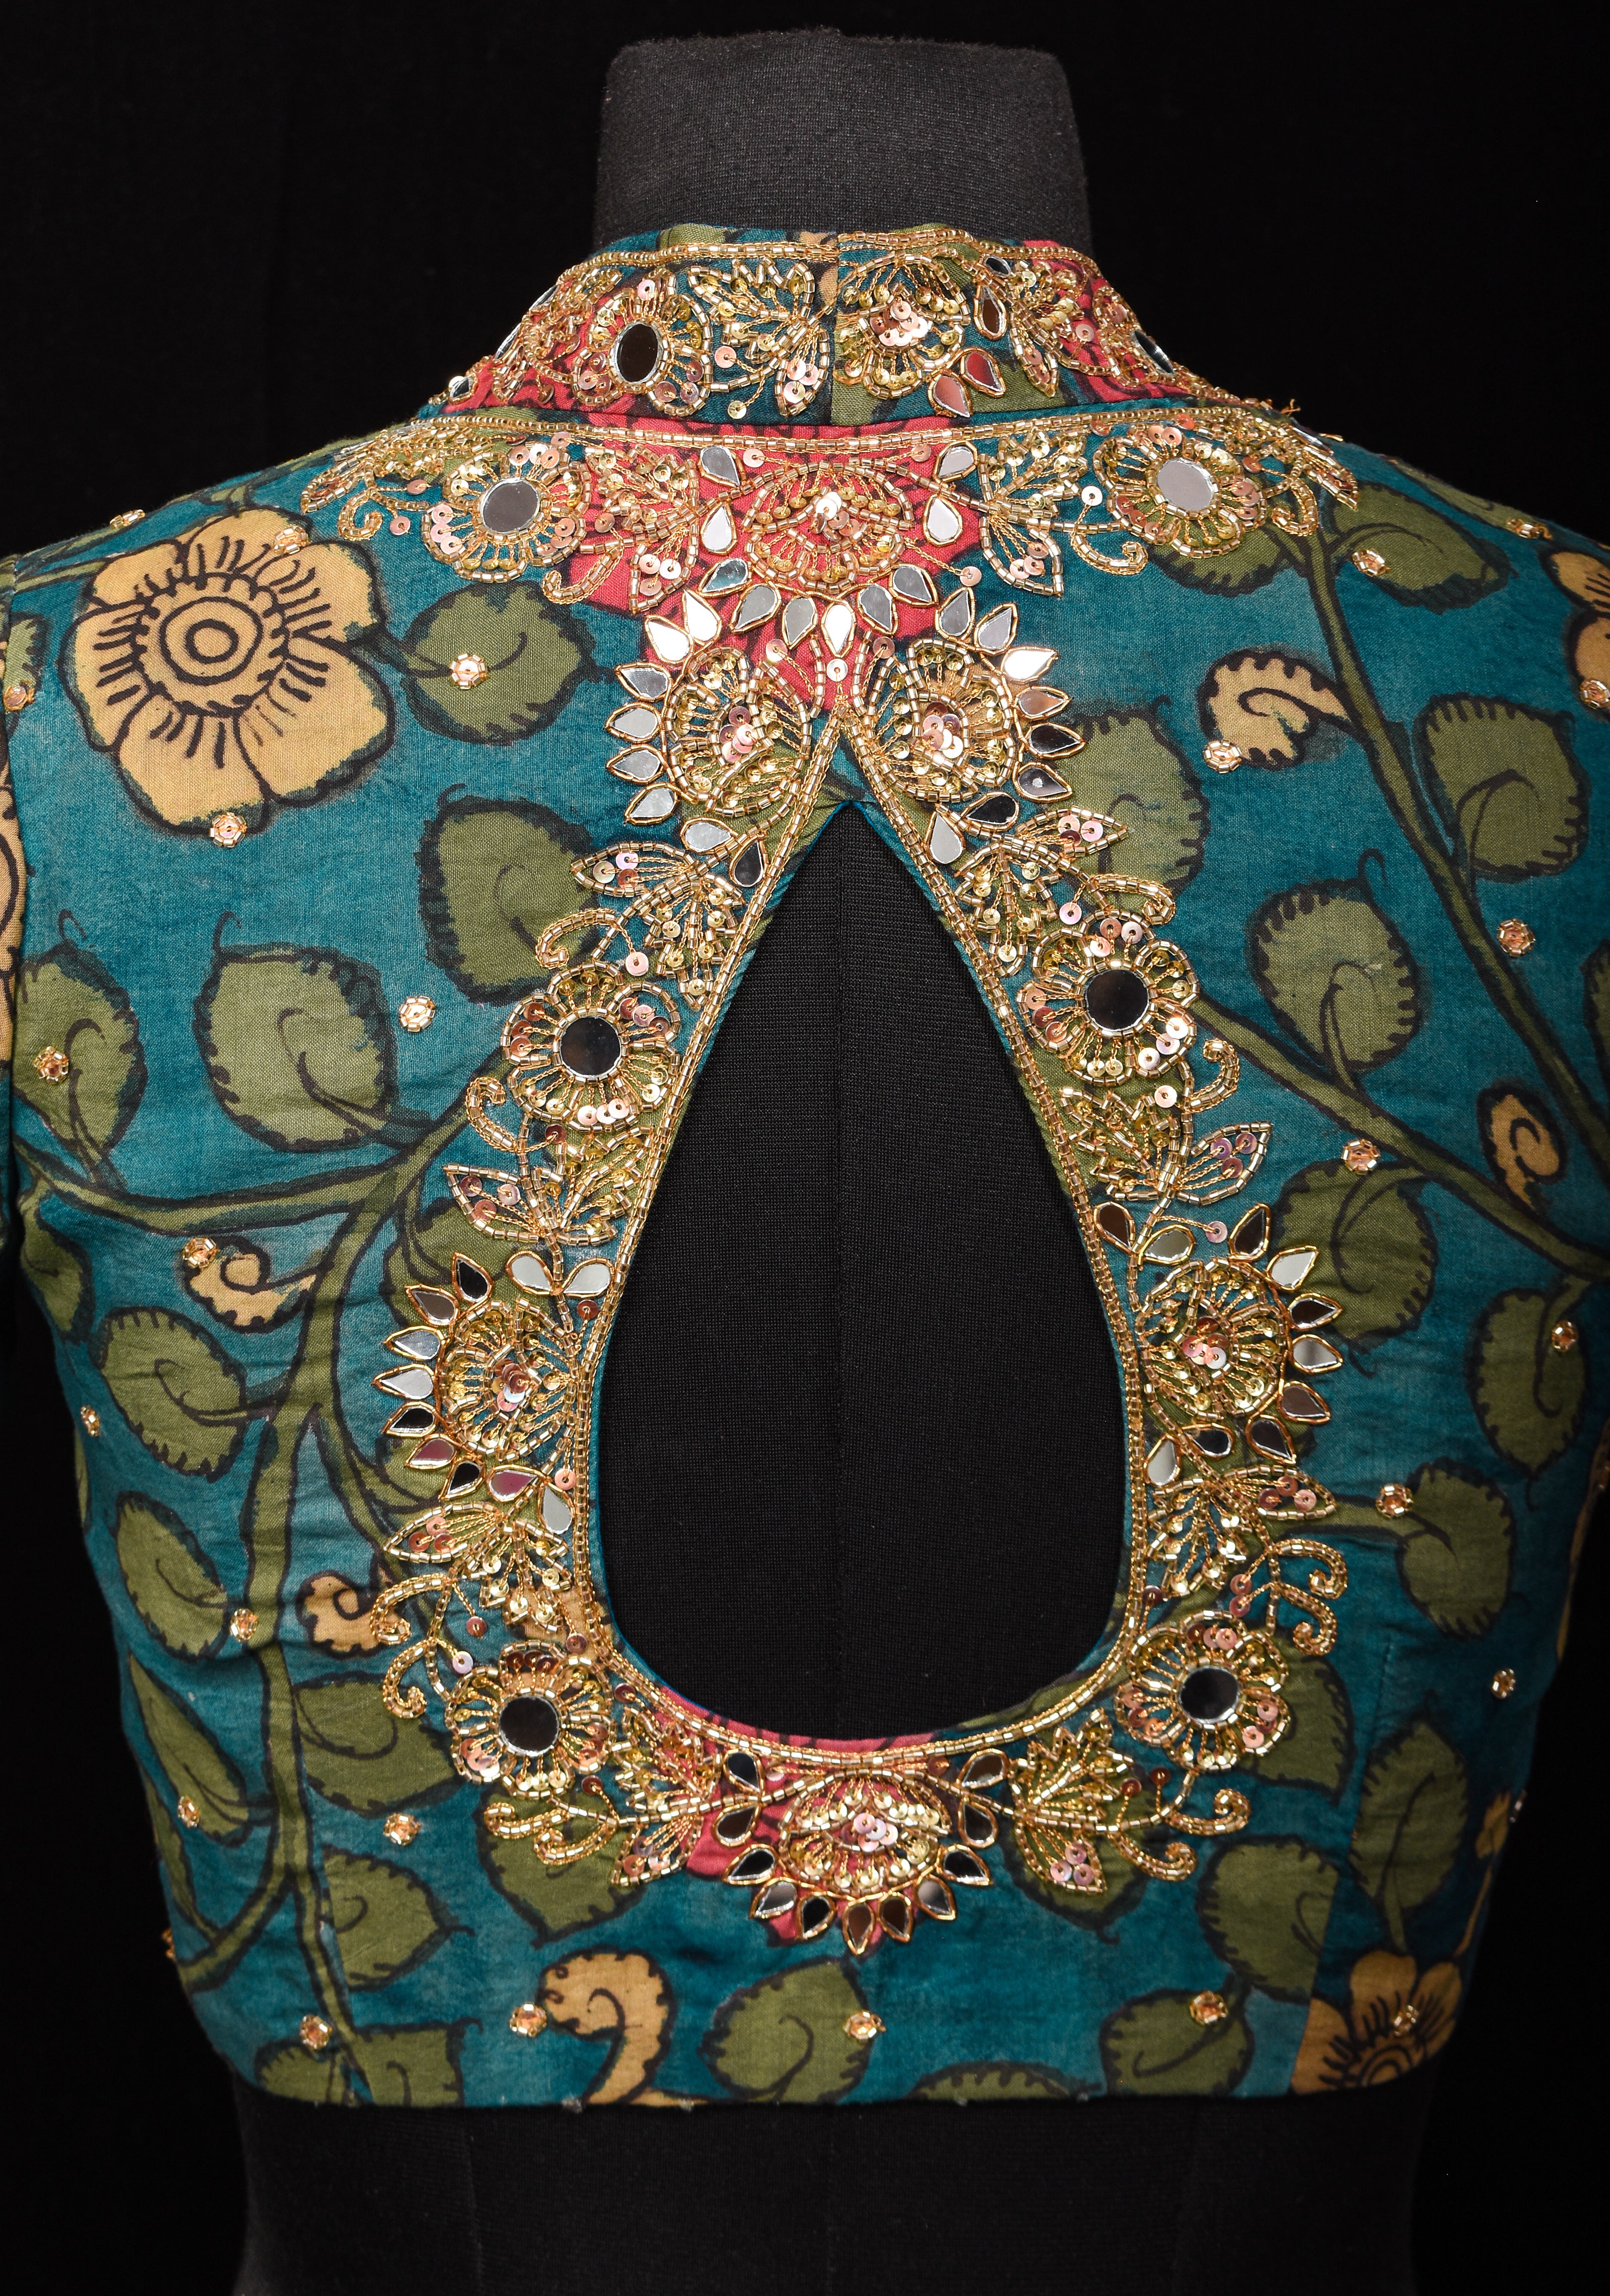 Teal Floral Authentic Pen Kalamkari Blouse with extensive Cutdana and Mirror work detailing, Customizable, Made To Order